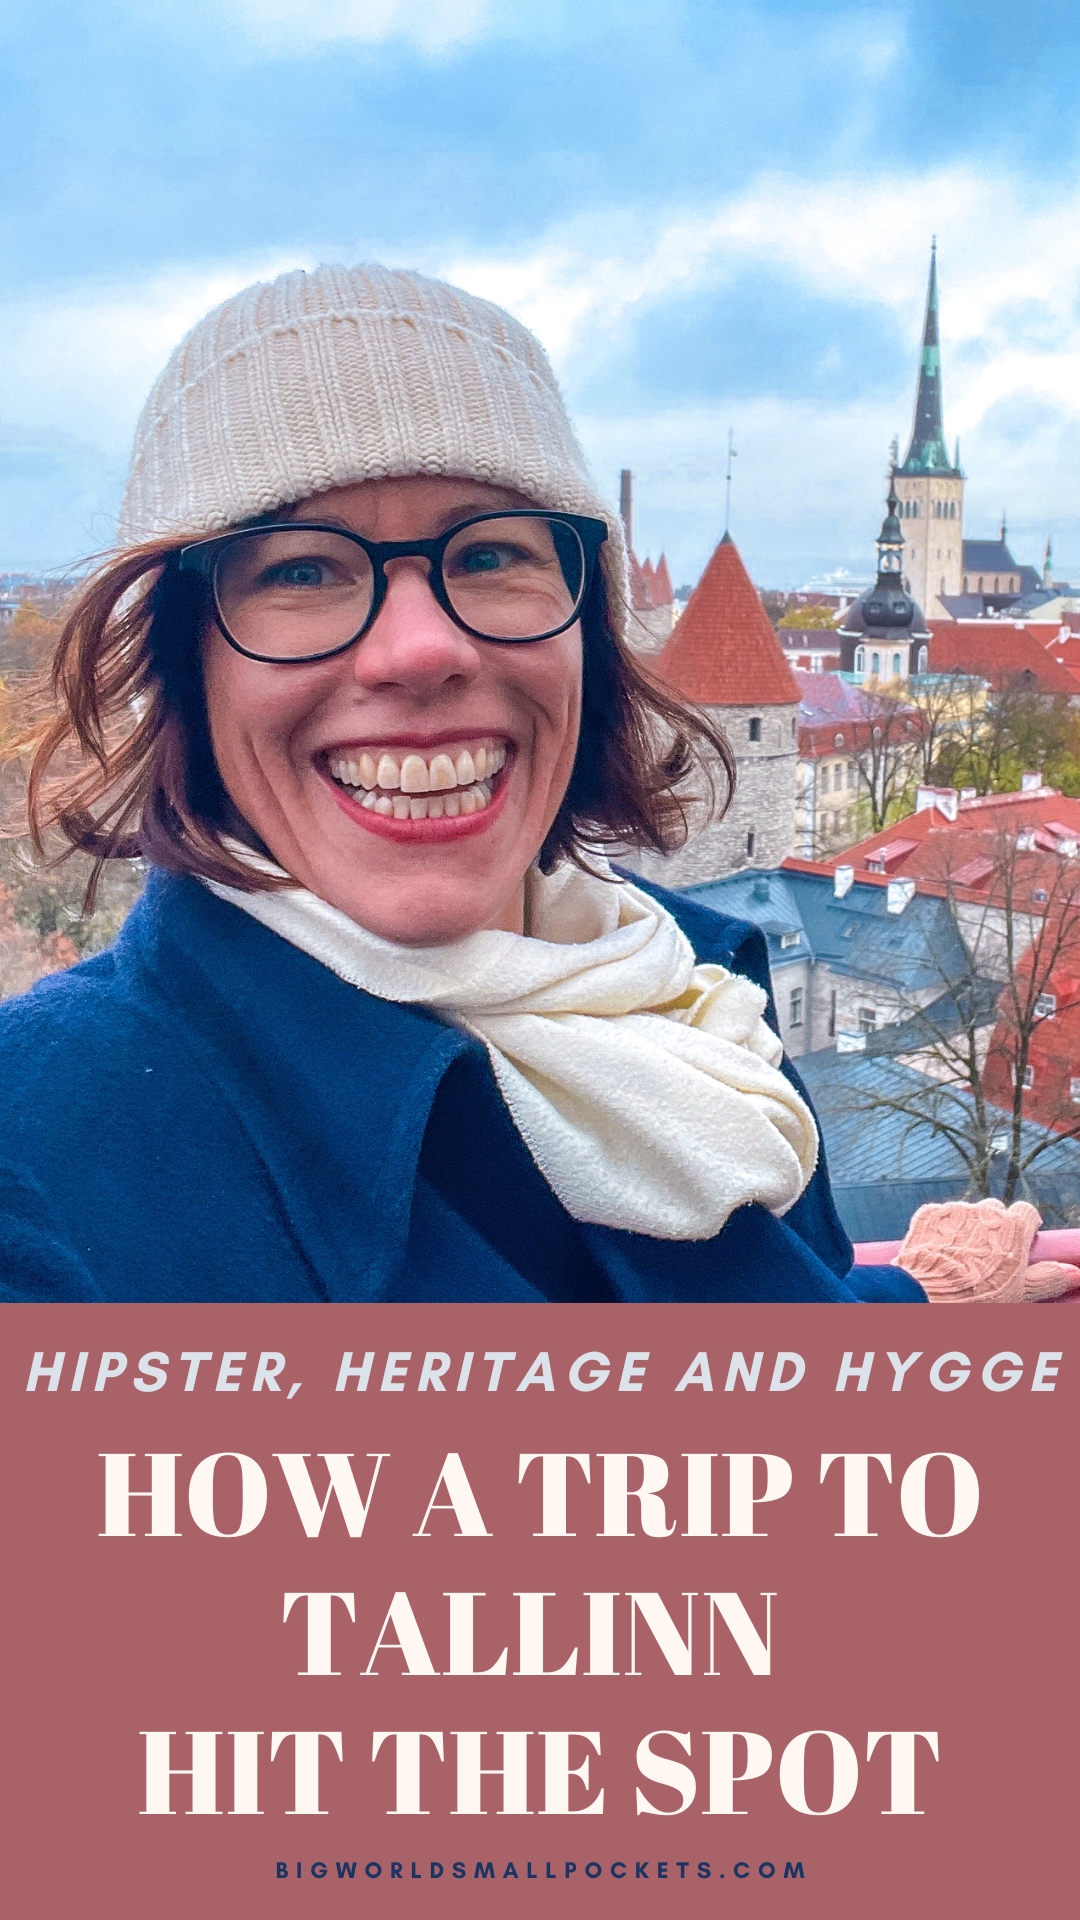 Hipster, Heritage and Hygge: How a Trip to Tallinn Hit the Spot